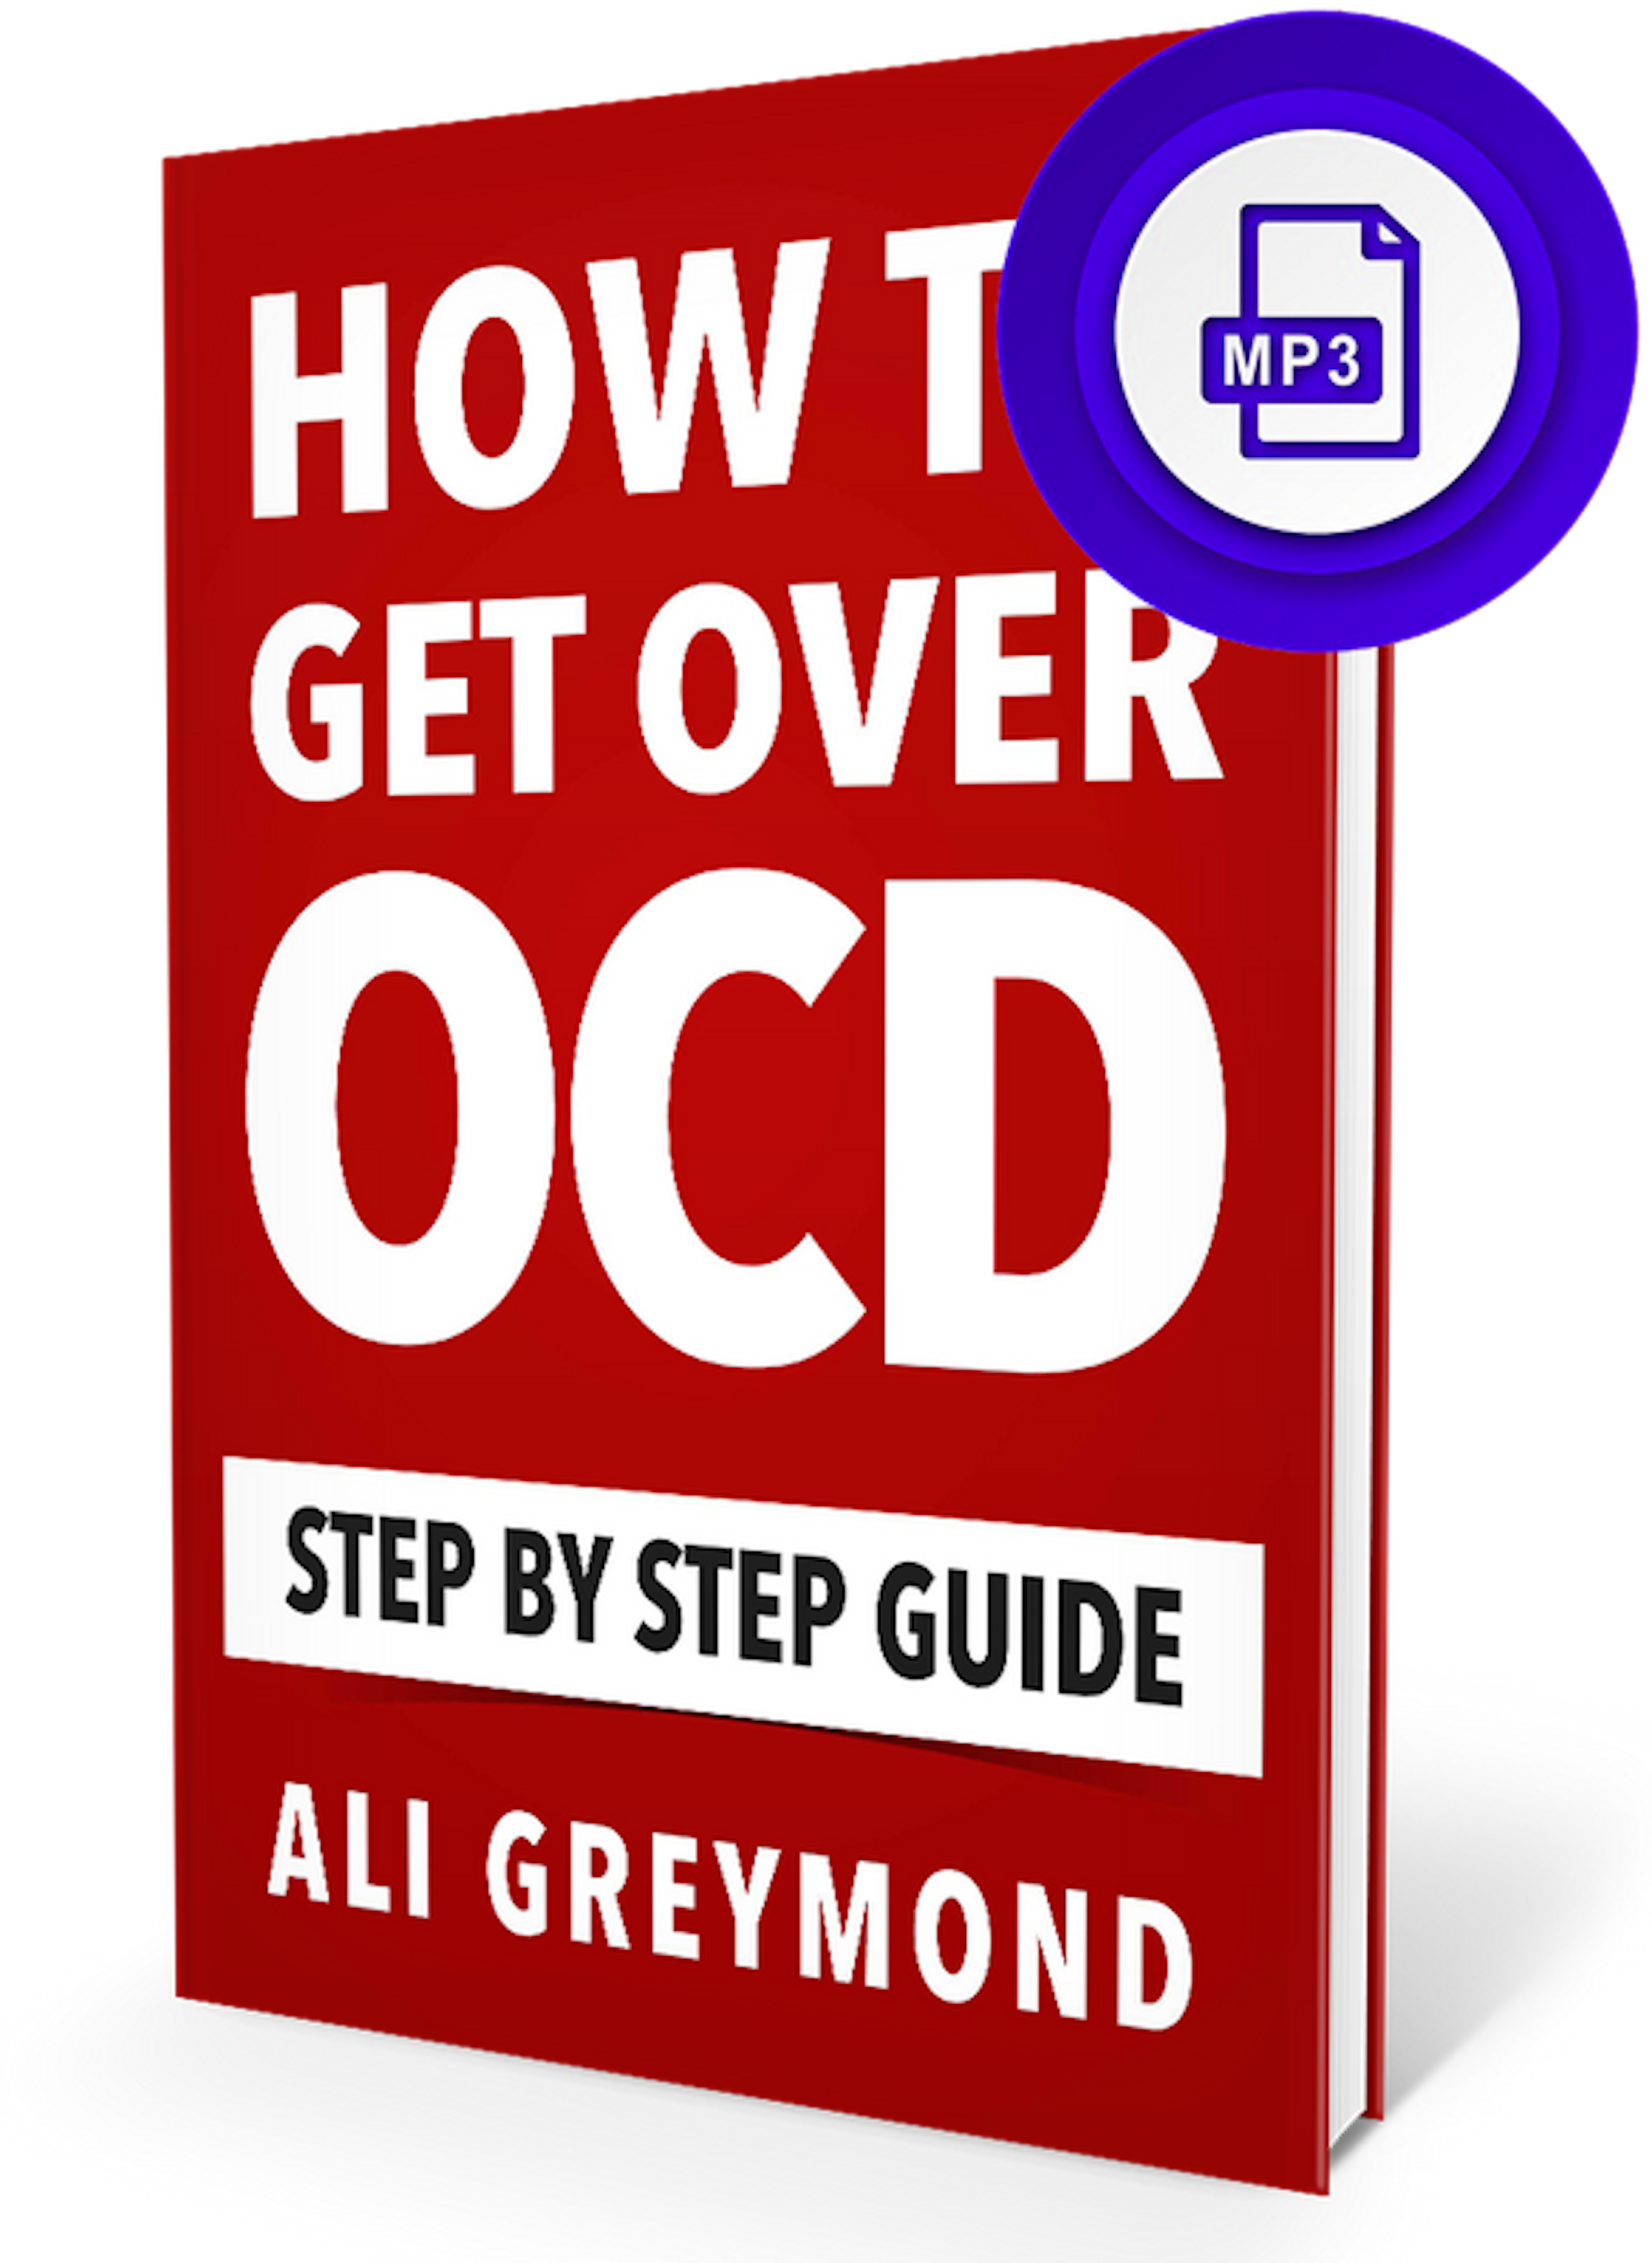 HOW TO GET OVER OCD (audio book)